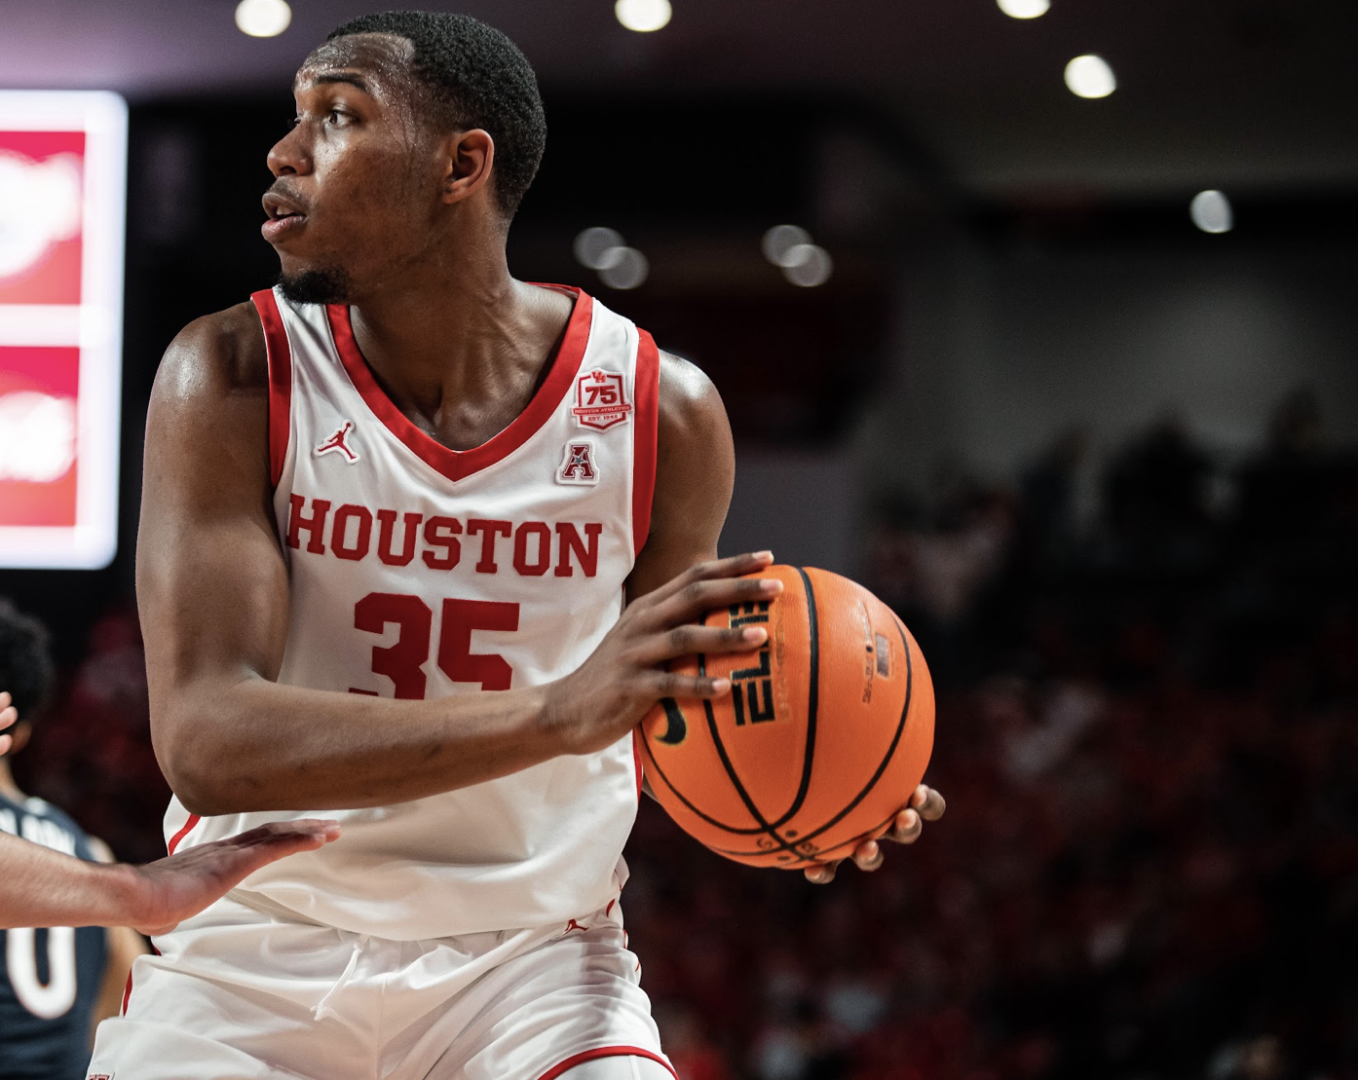 Fabian White Jr. picked up his 44th career win inside the Fertitta Center on Saturday night, becoming the UH basketball program's winningest player inside the Cougars arena. | James Schillinger/The Cougar